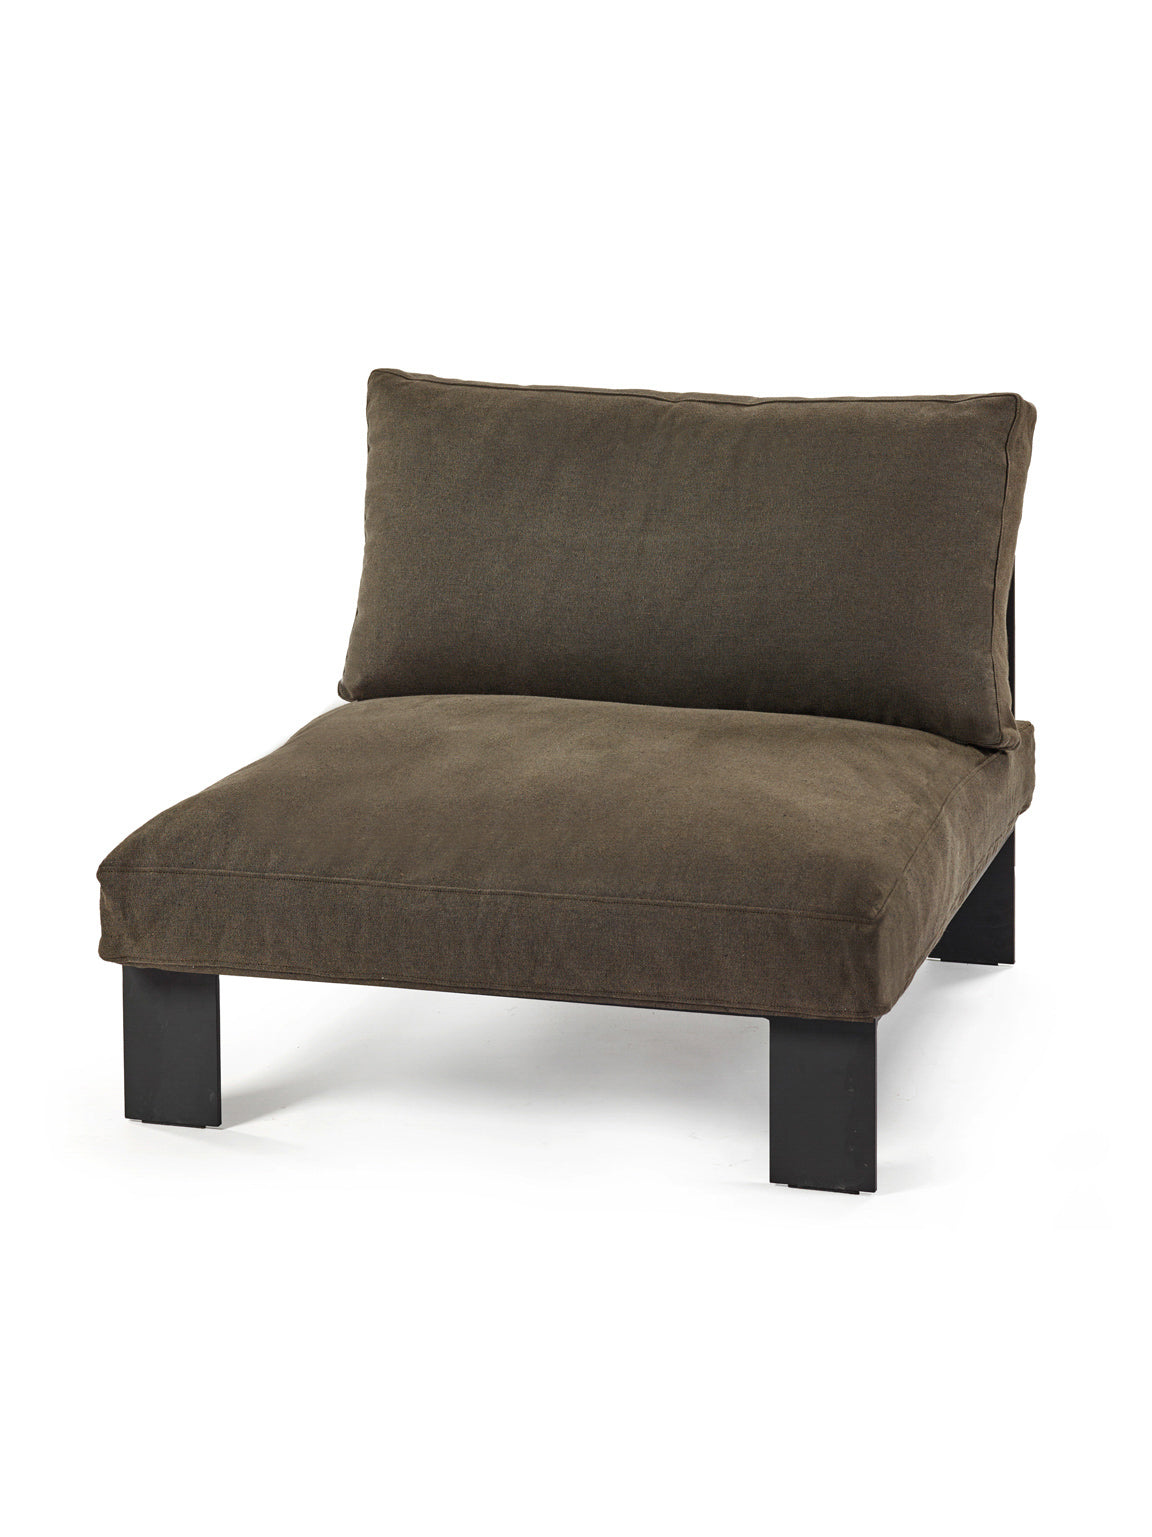 Mombaers Lounge Chair - Sepia